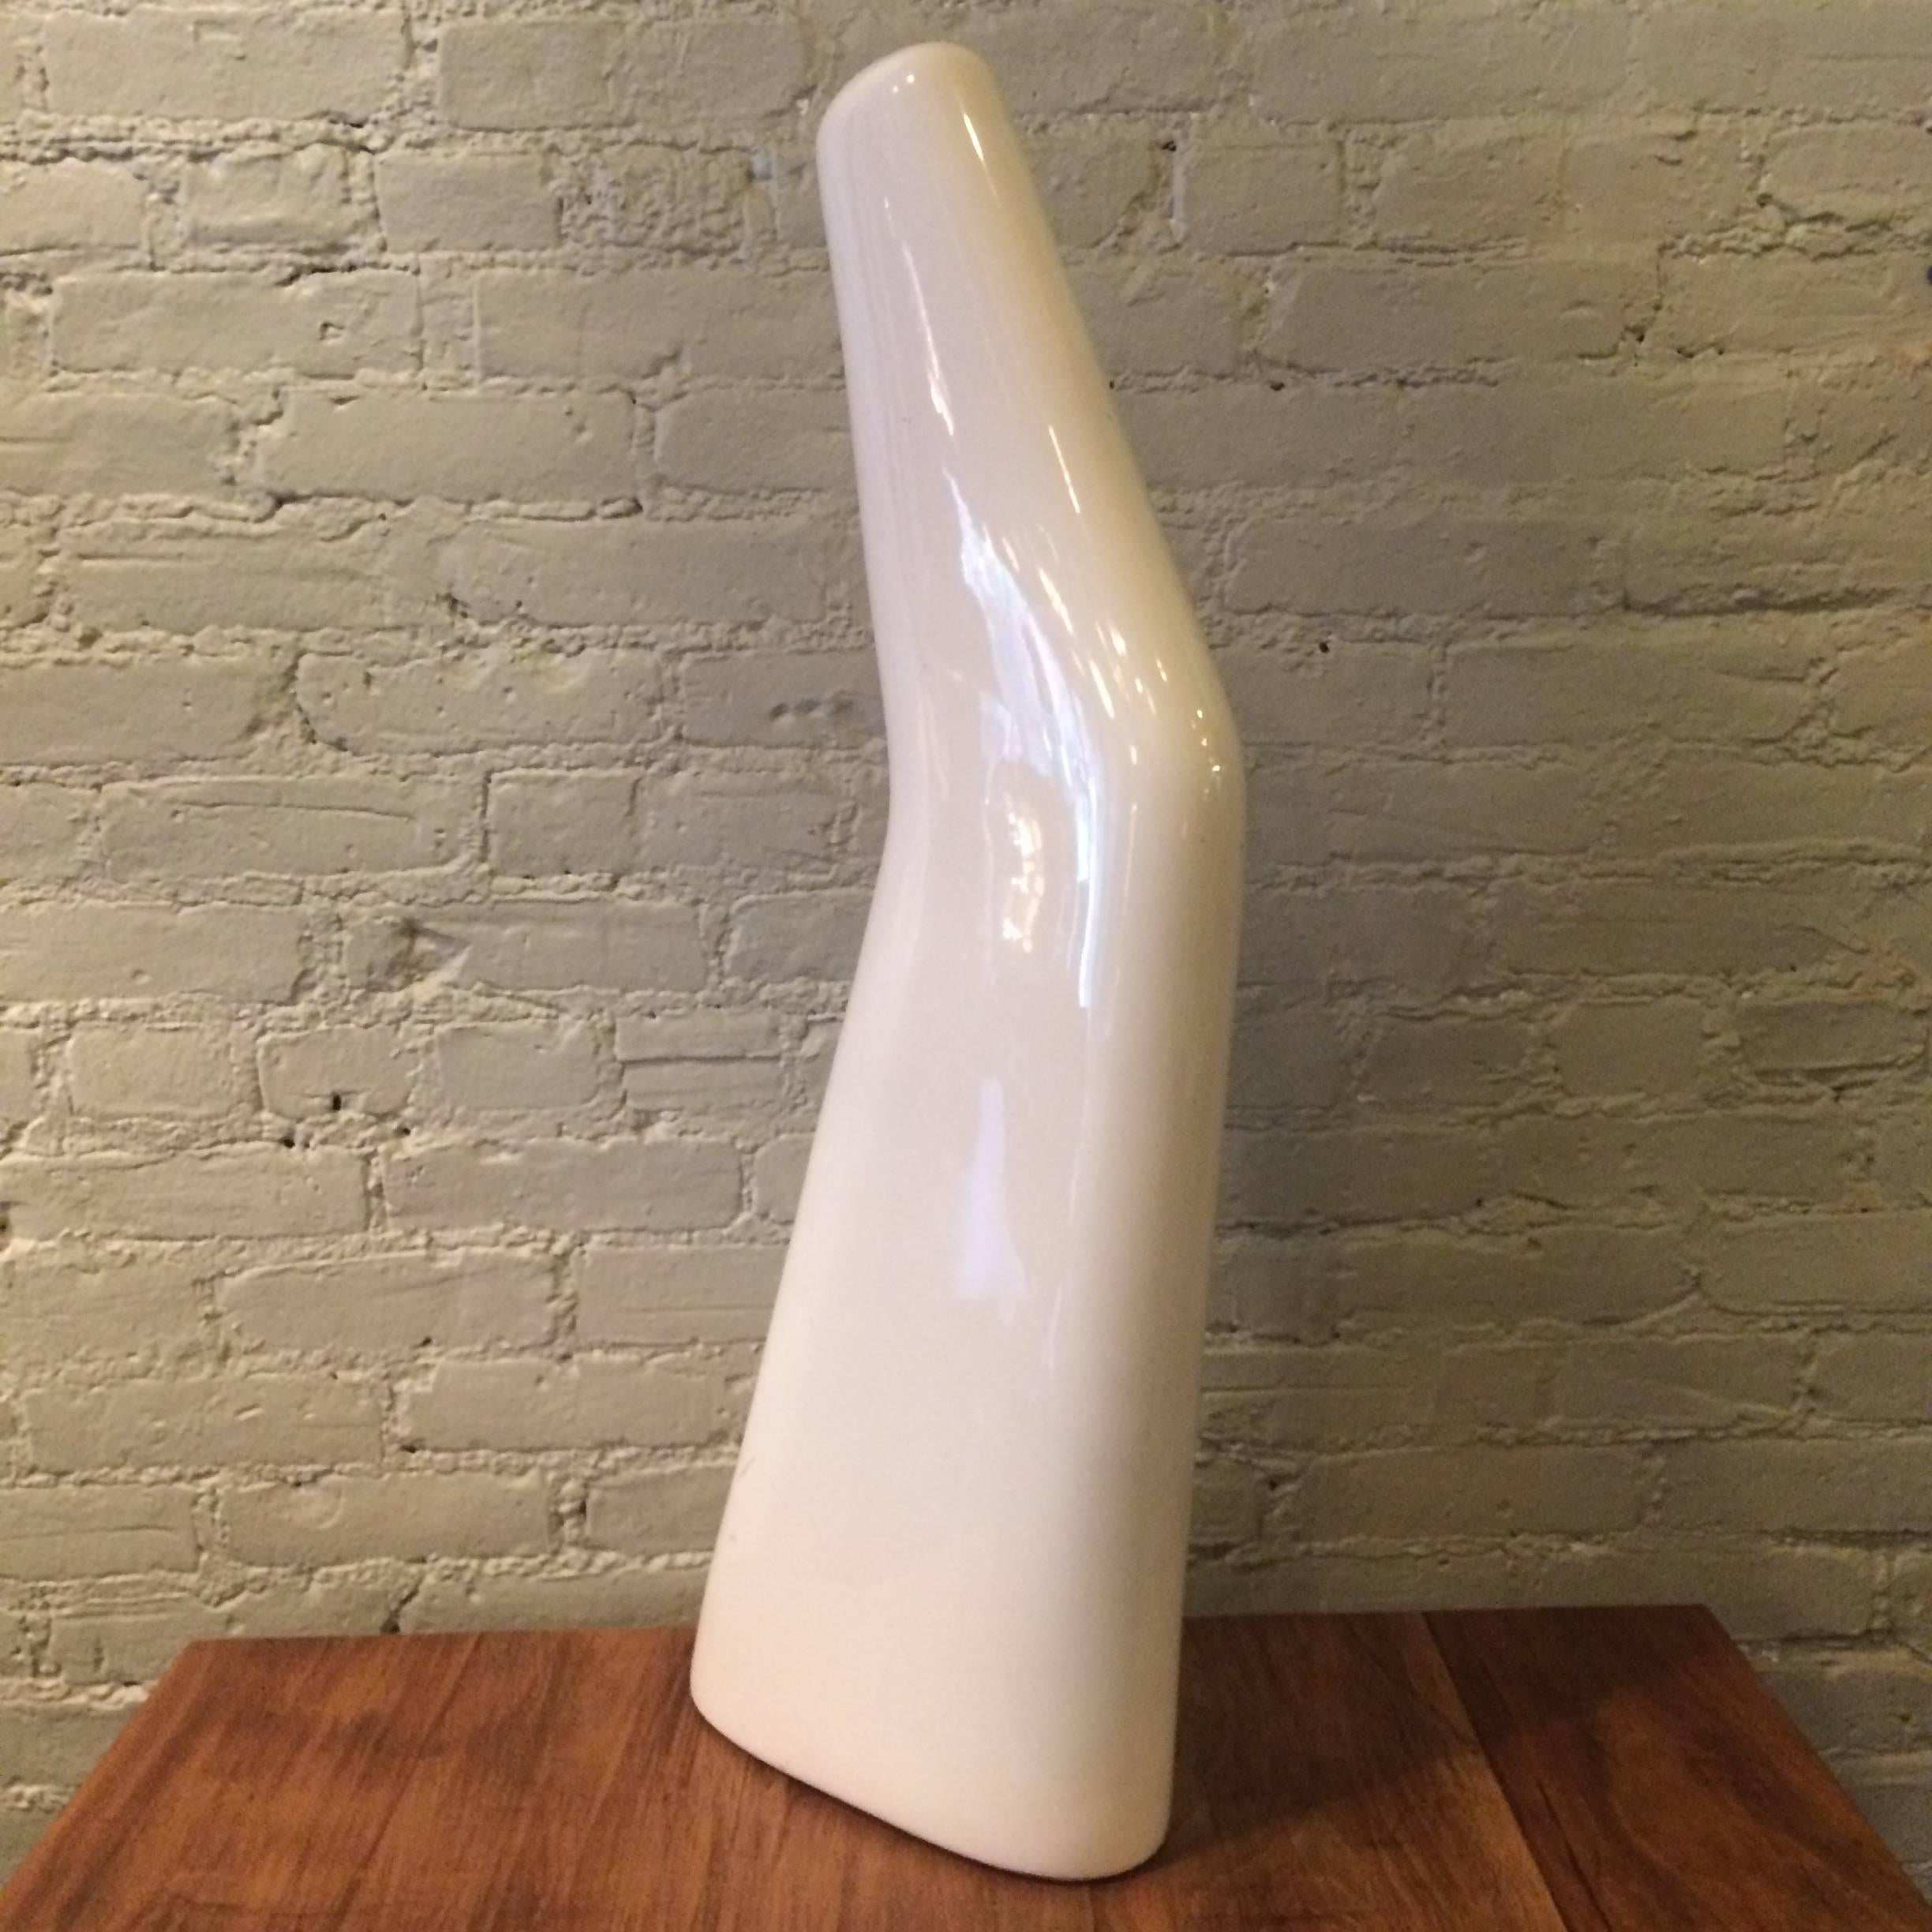 Tall, arched, porcelain, stocking display mold makes a striking, abstract, Industrial sculpture, object or accent piece.